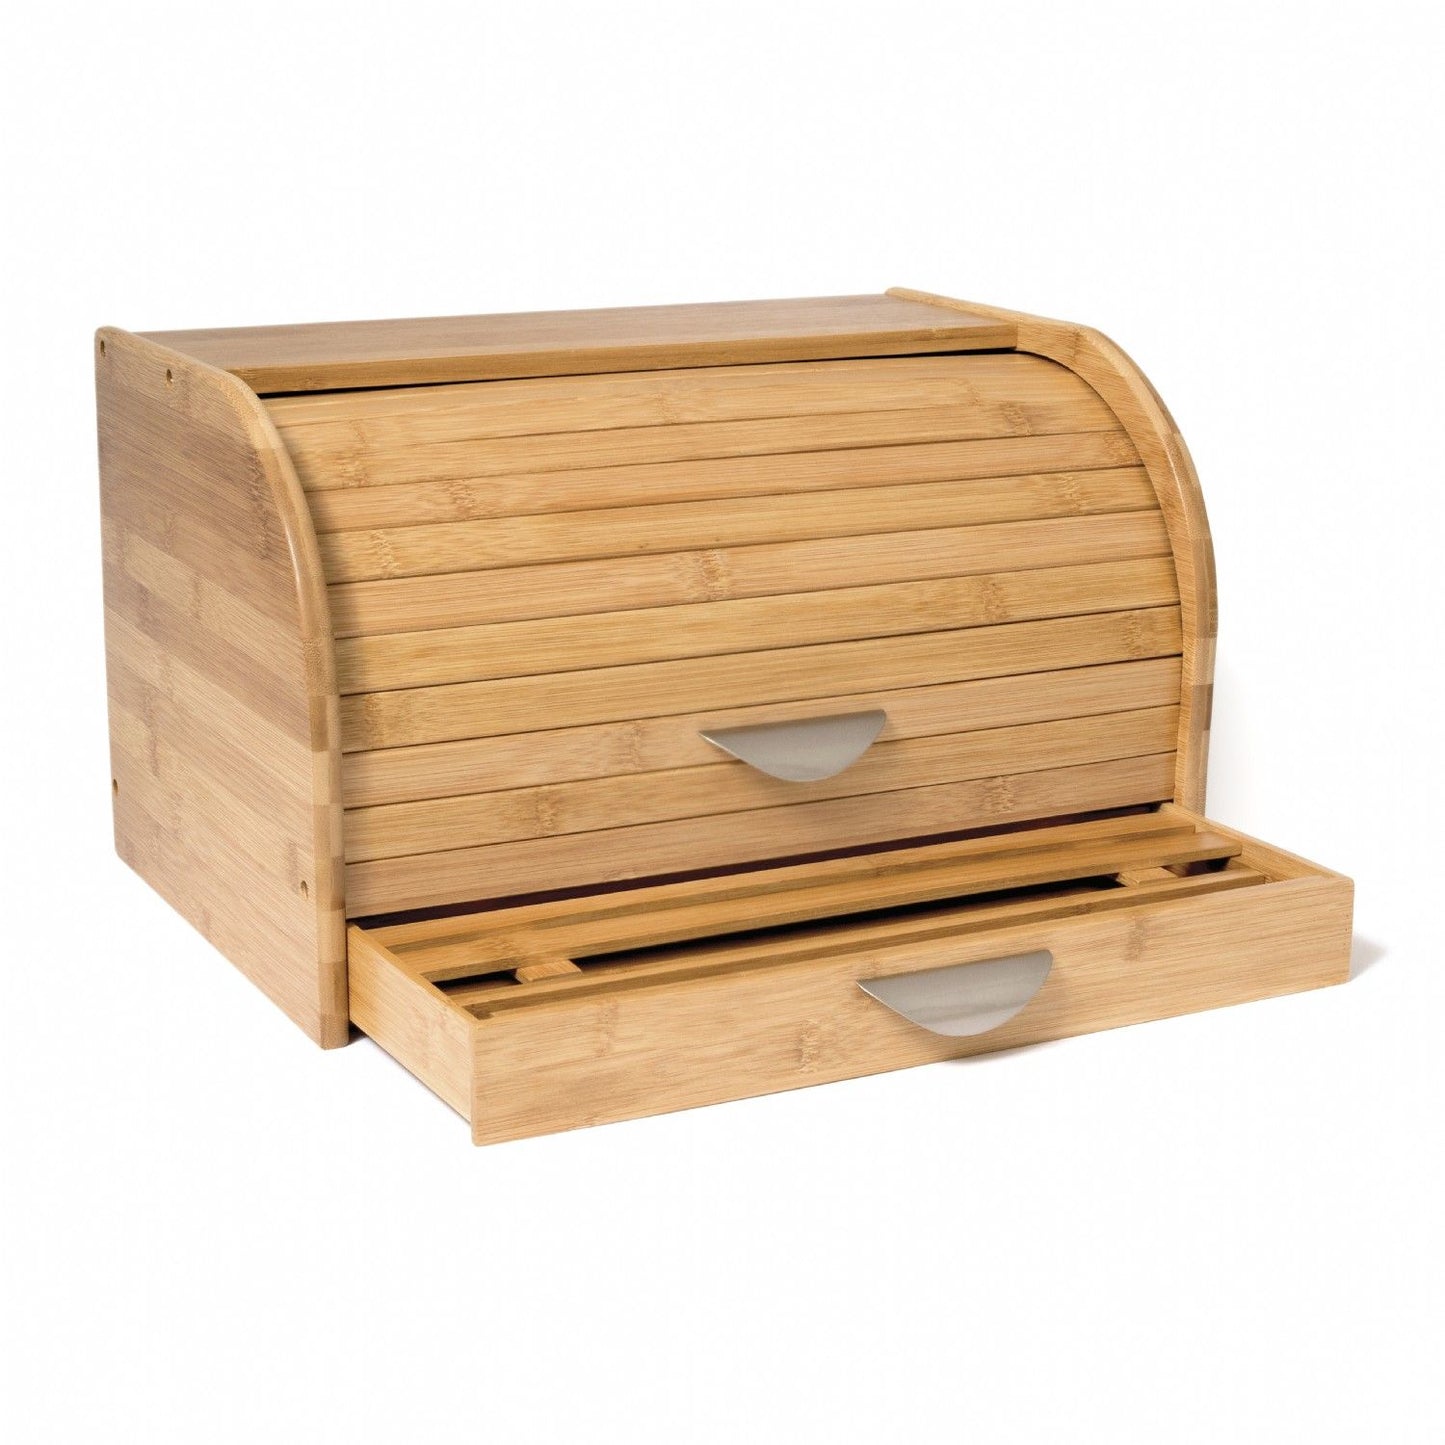 Lipper International Bamboo Roll-Top Breadbox with Drawer, Brown